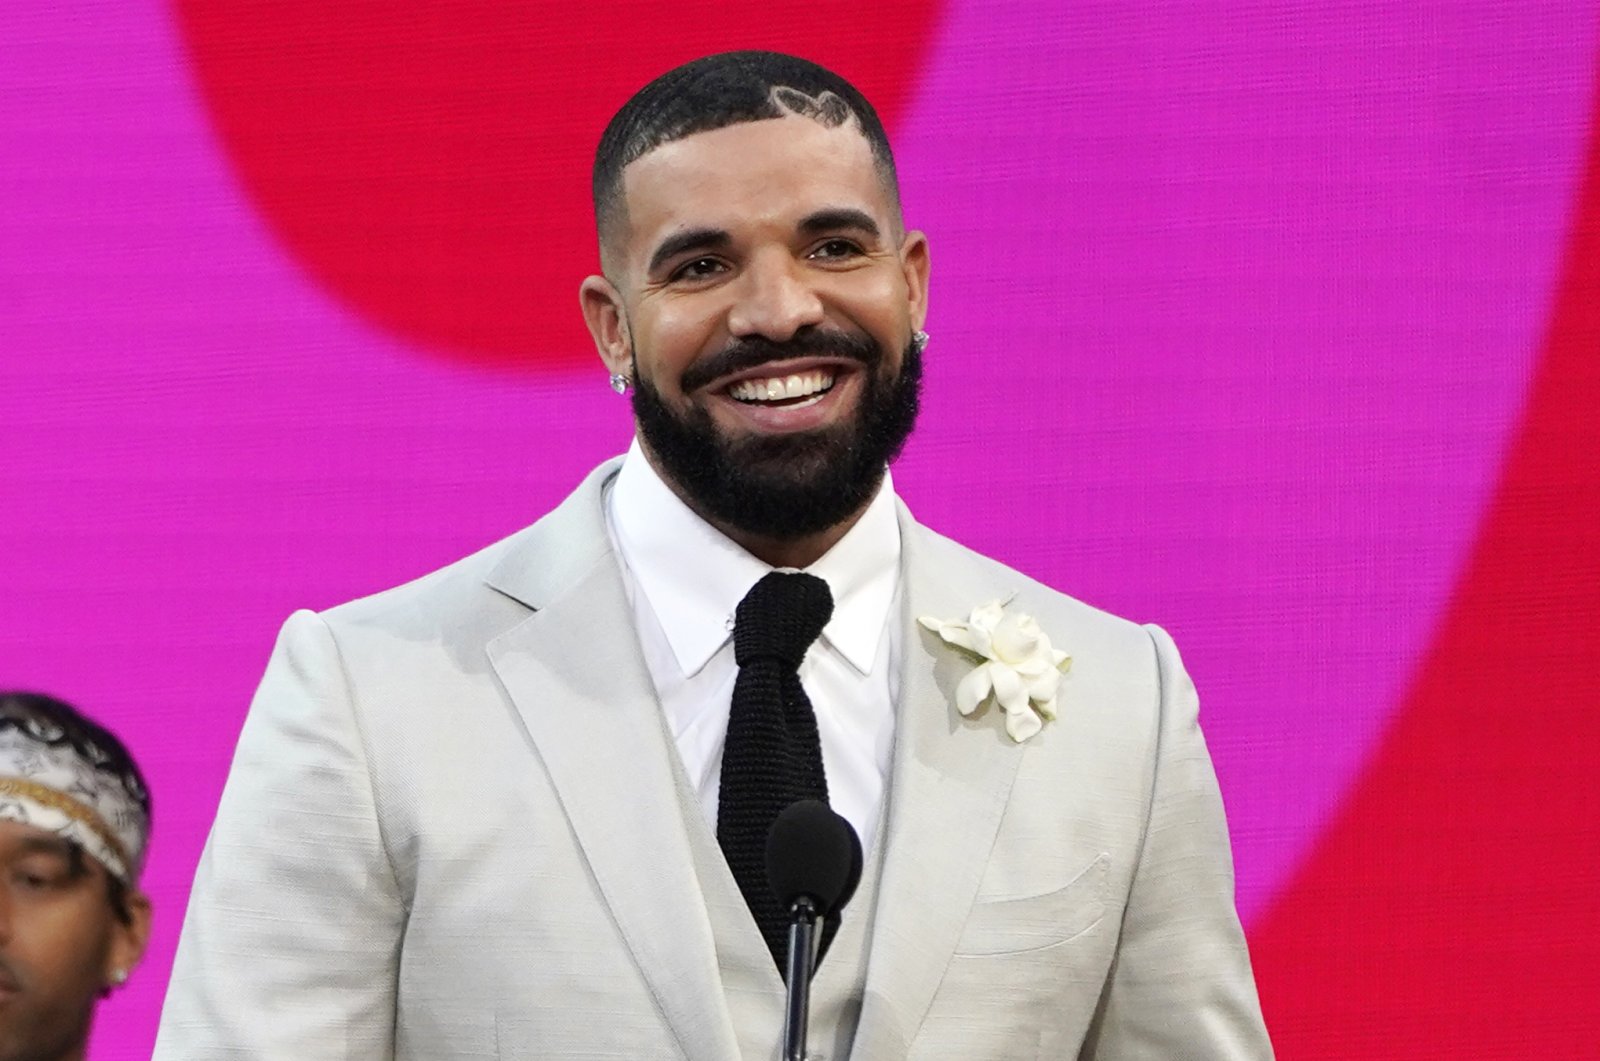 Drake accepts the artist of the decade award at the Billboard Music Awards at the Microsoft Theater in Los Angeles, U.S., May 23, 2021. (AP Photo)